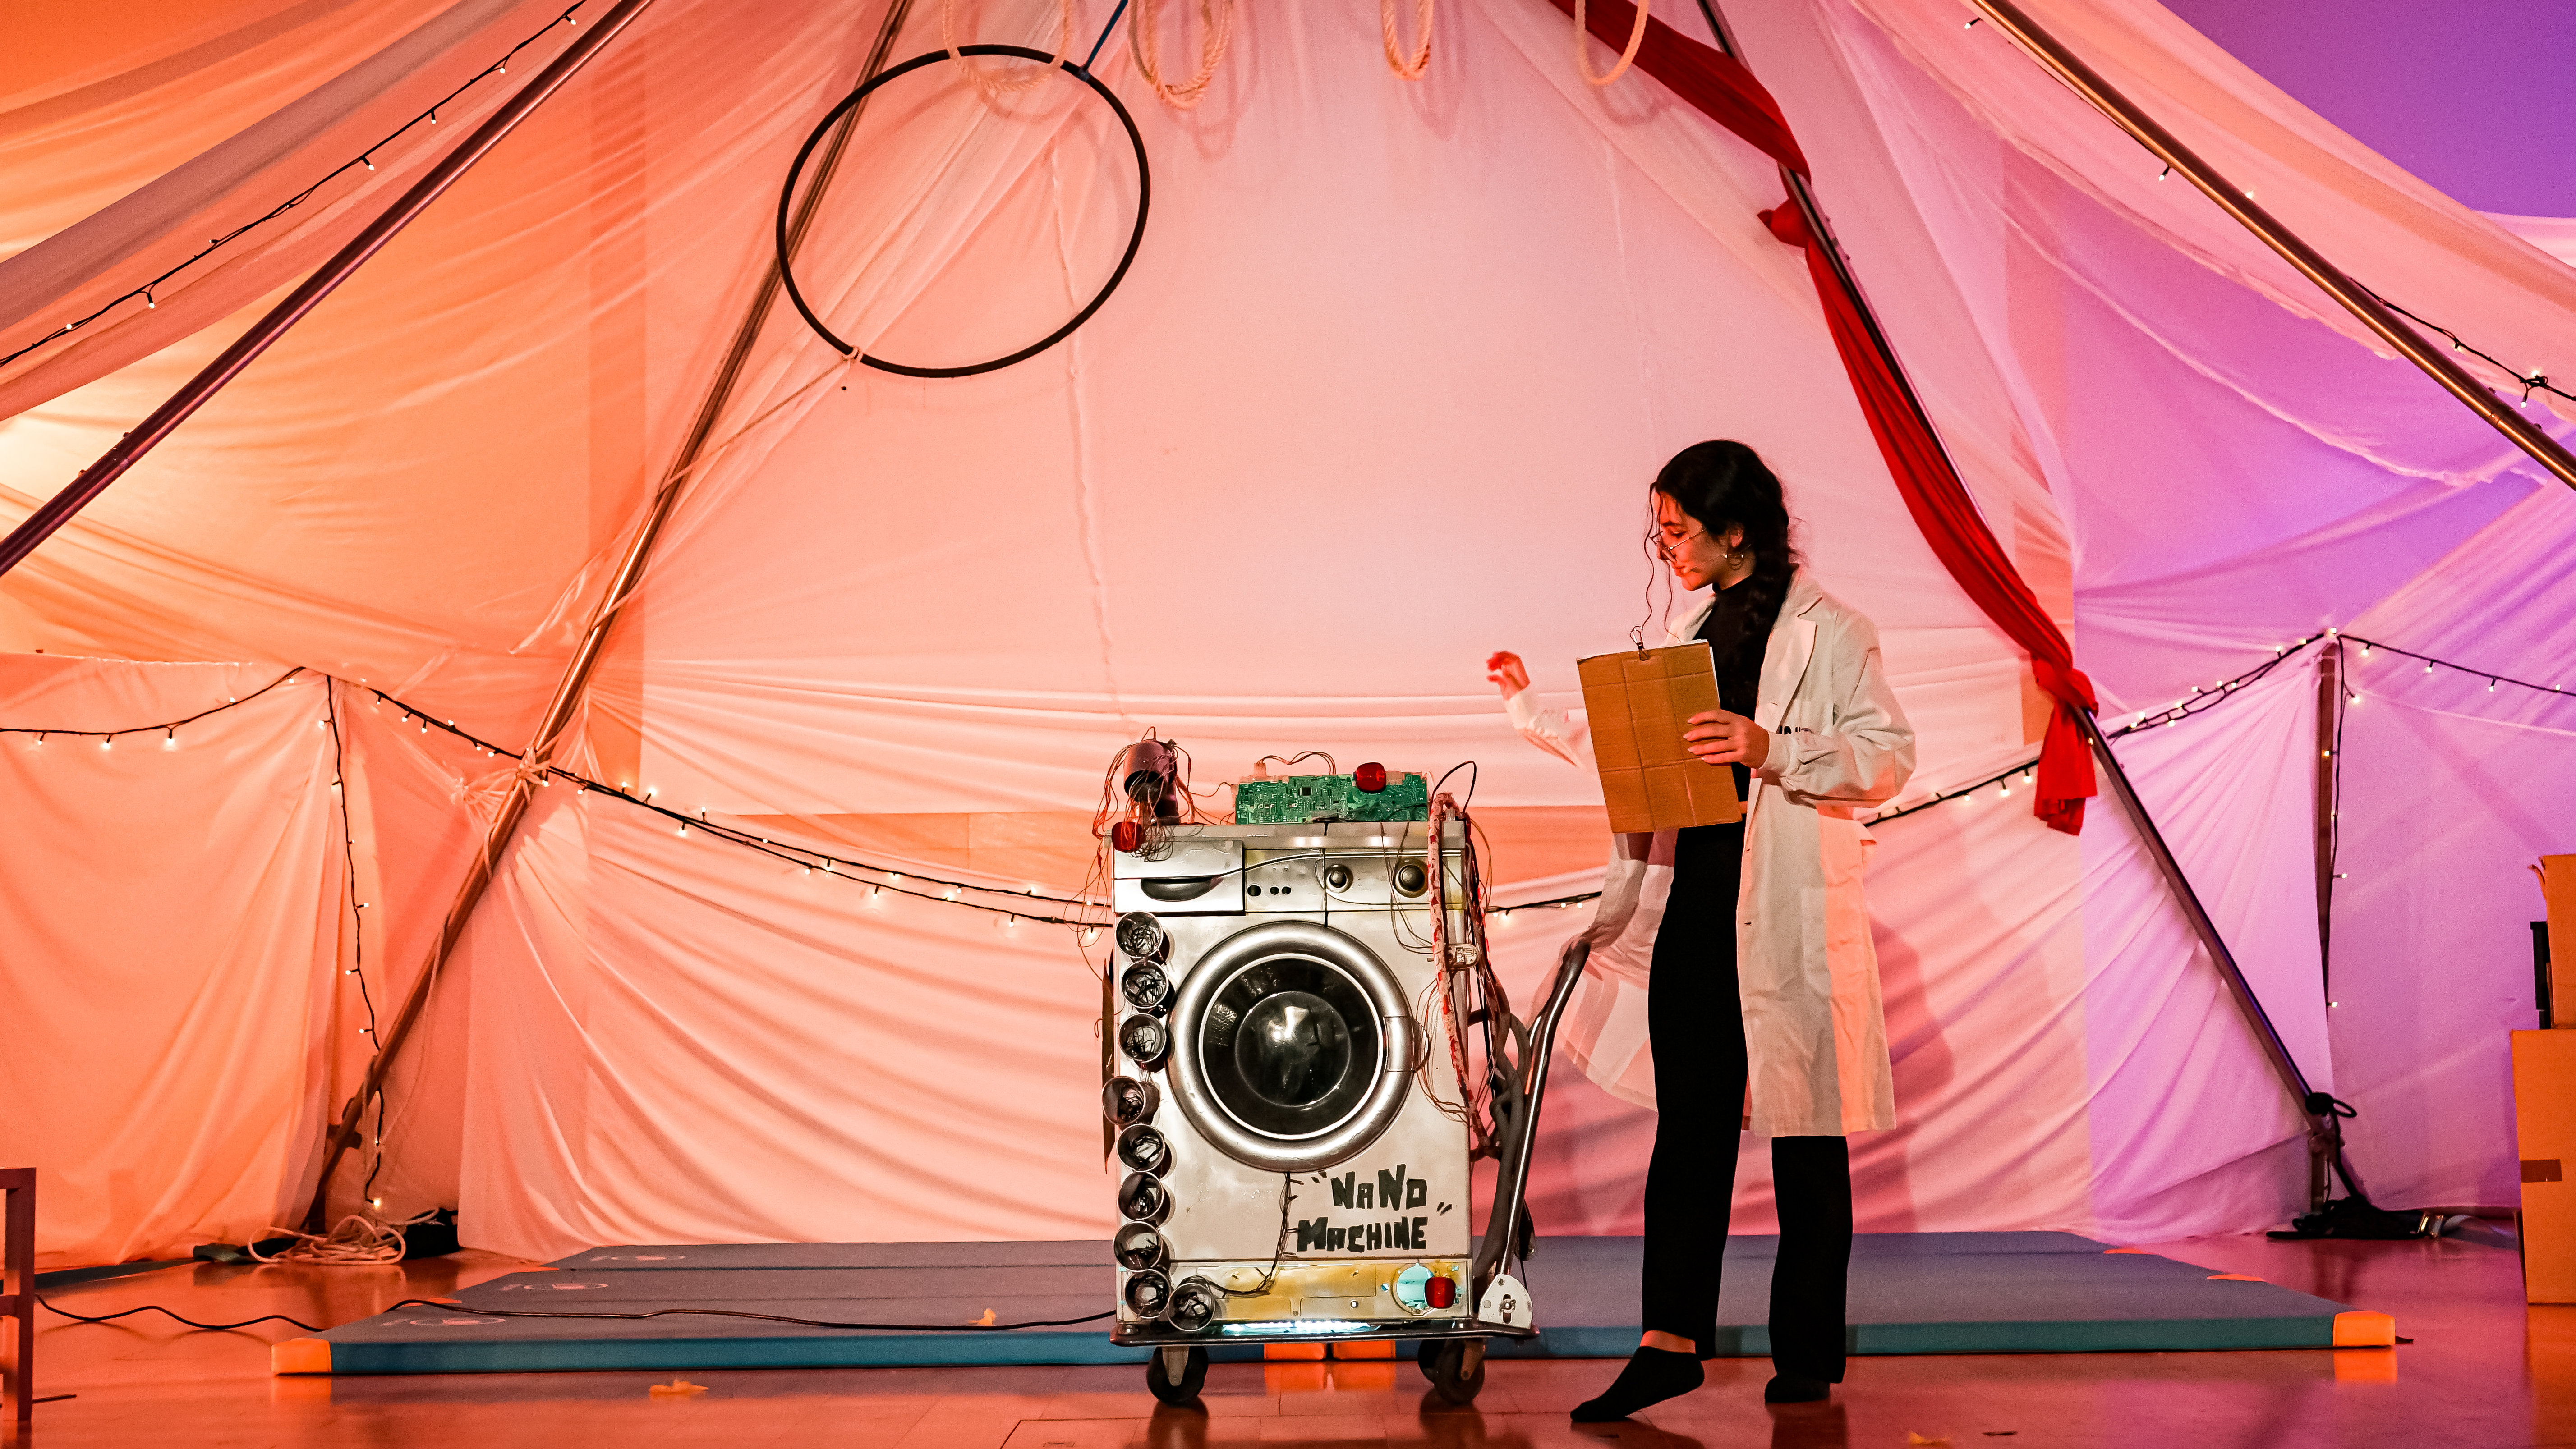 Nano Circus: the amazing experience of arts & science